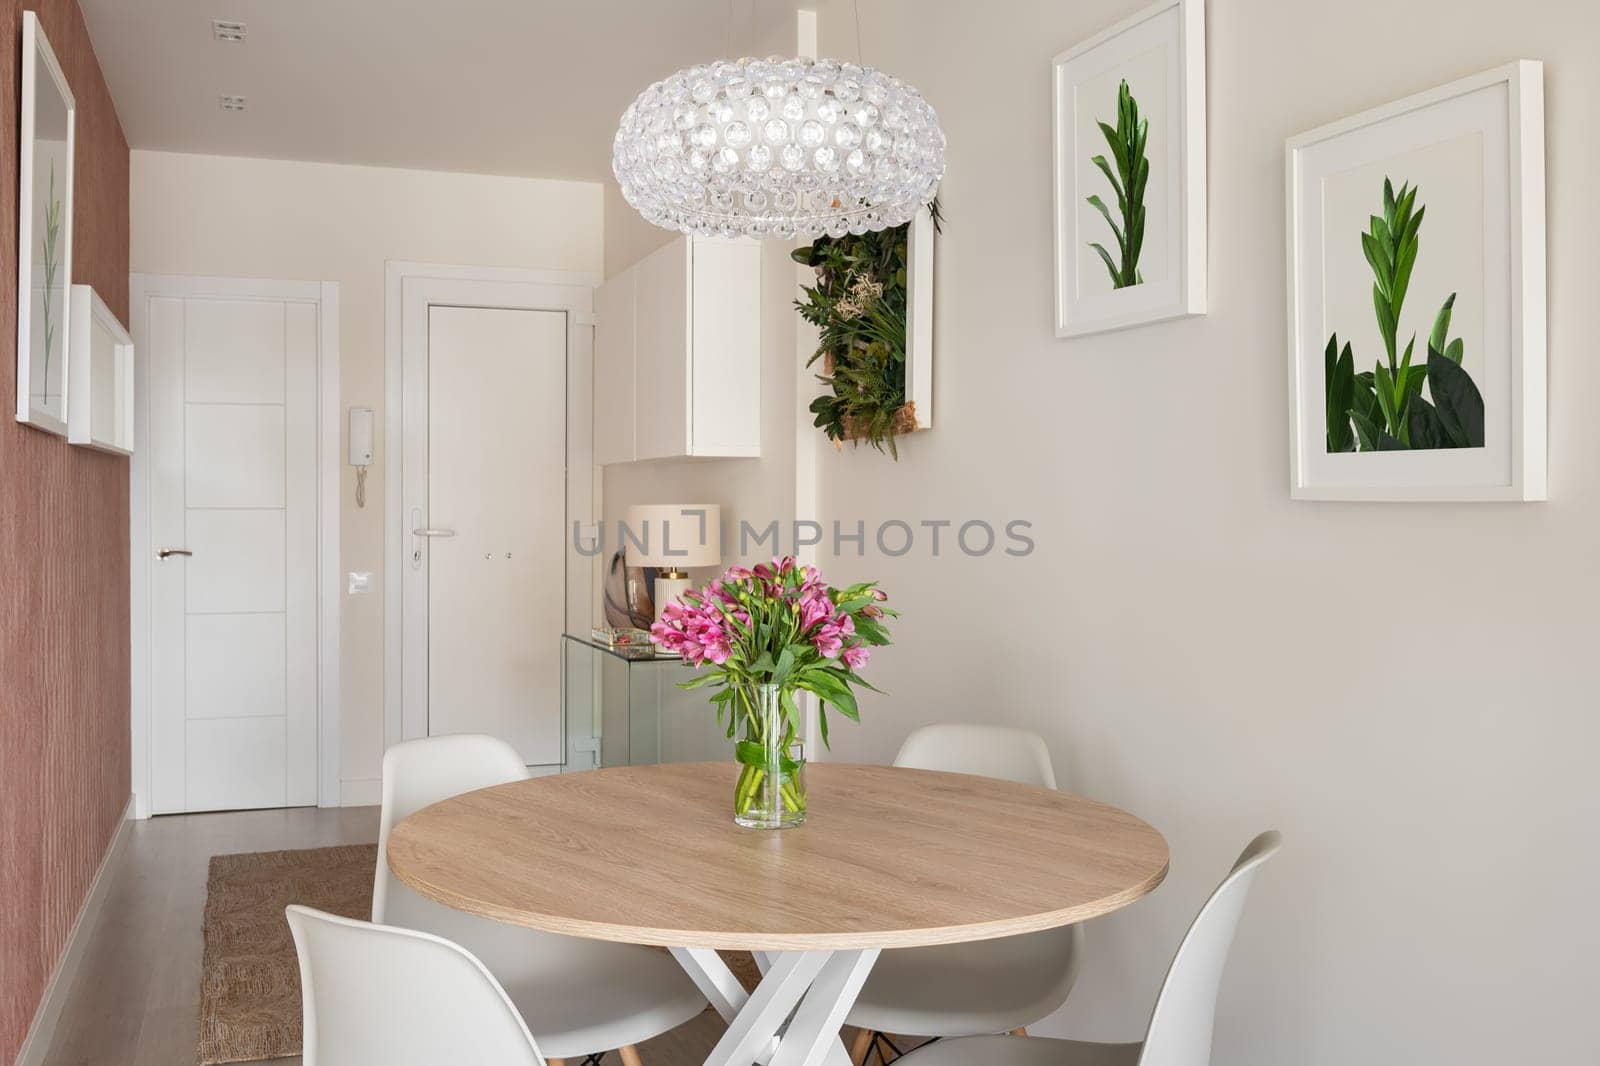 Entrance hall dining room with a round wooden table, white chairs and paintings in the interior of a modern apartment